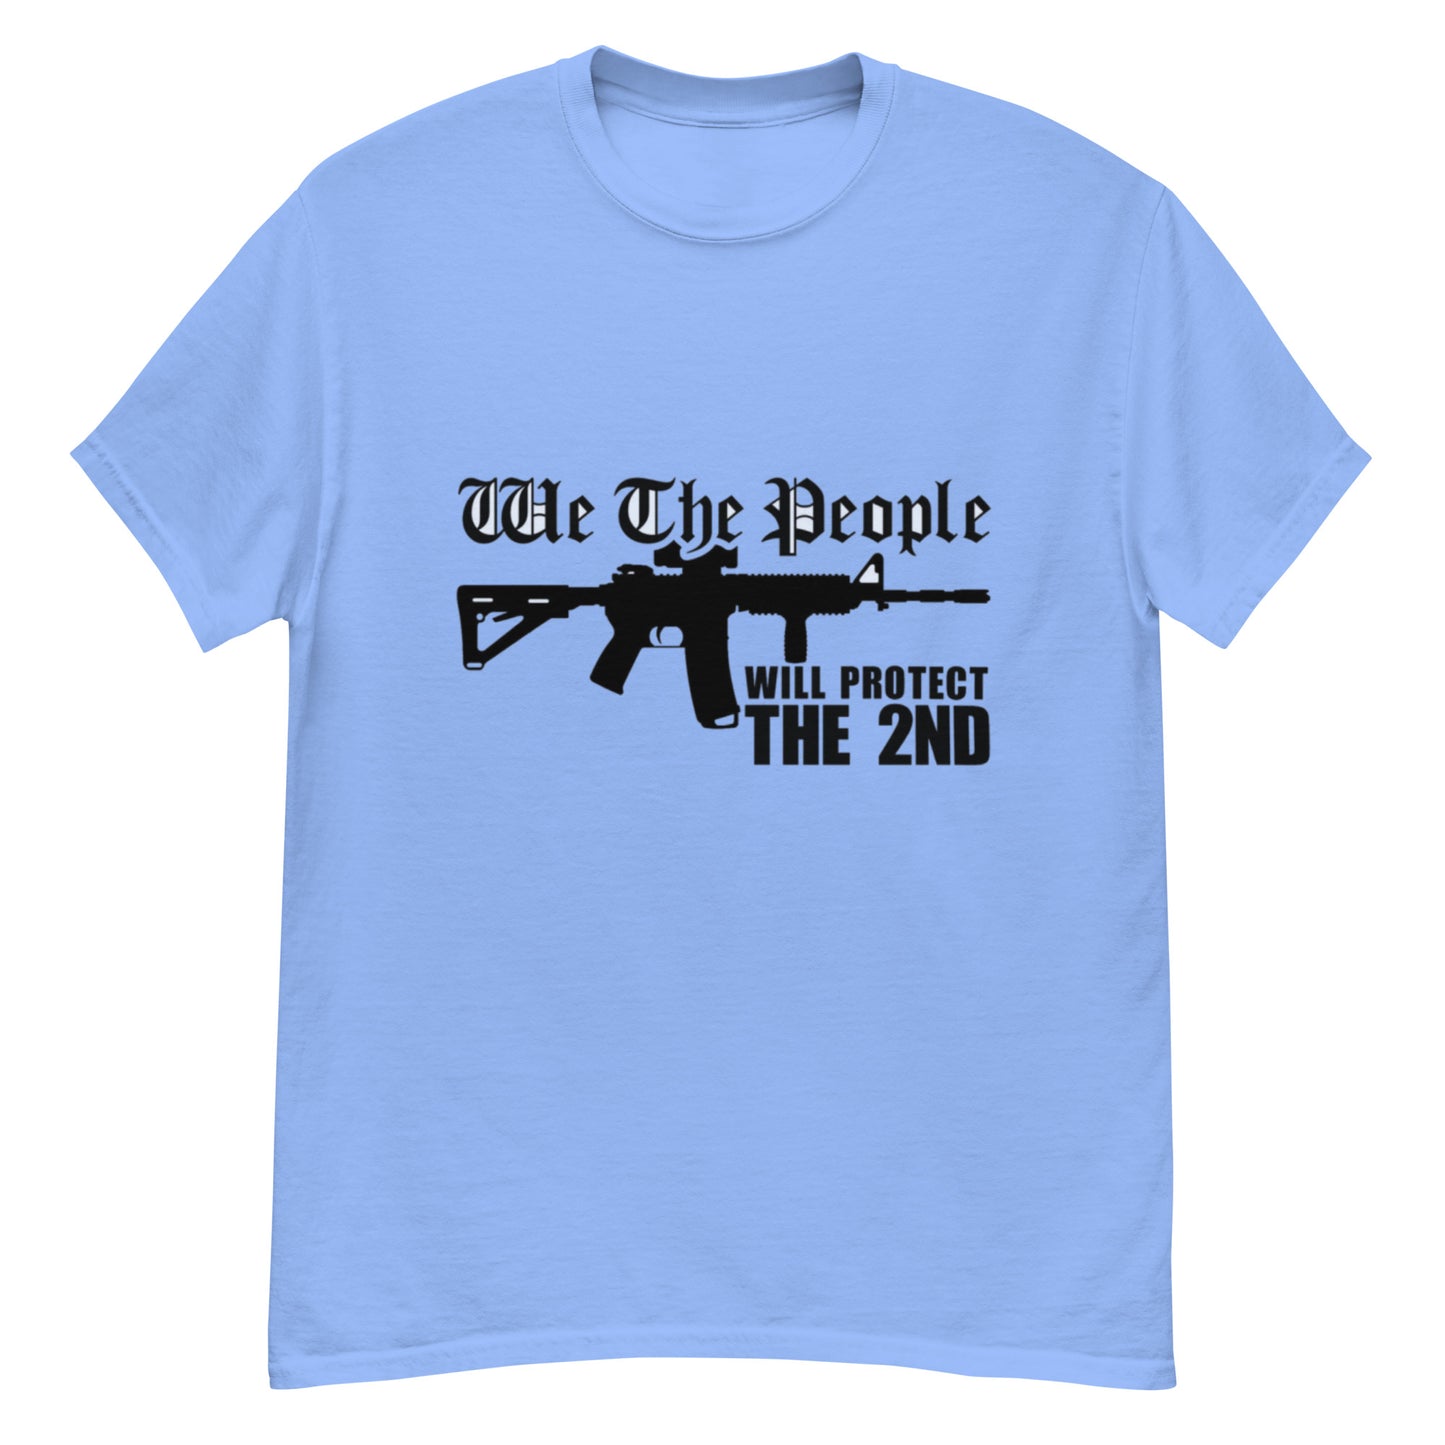 We The People will protect the 2nd - Unisex t-shirt